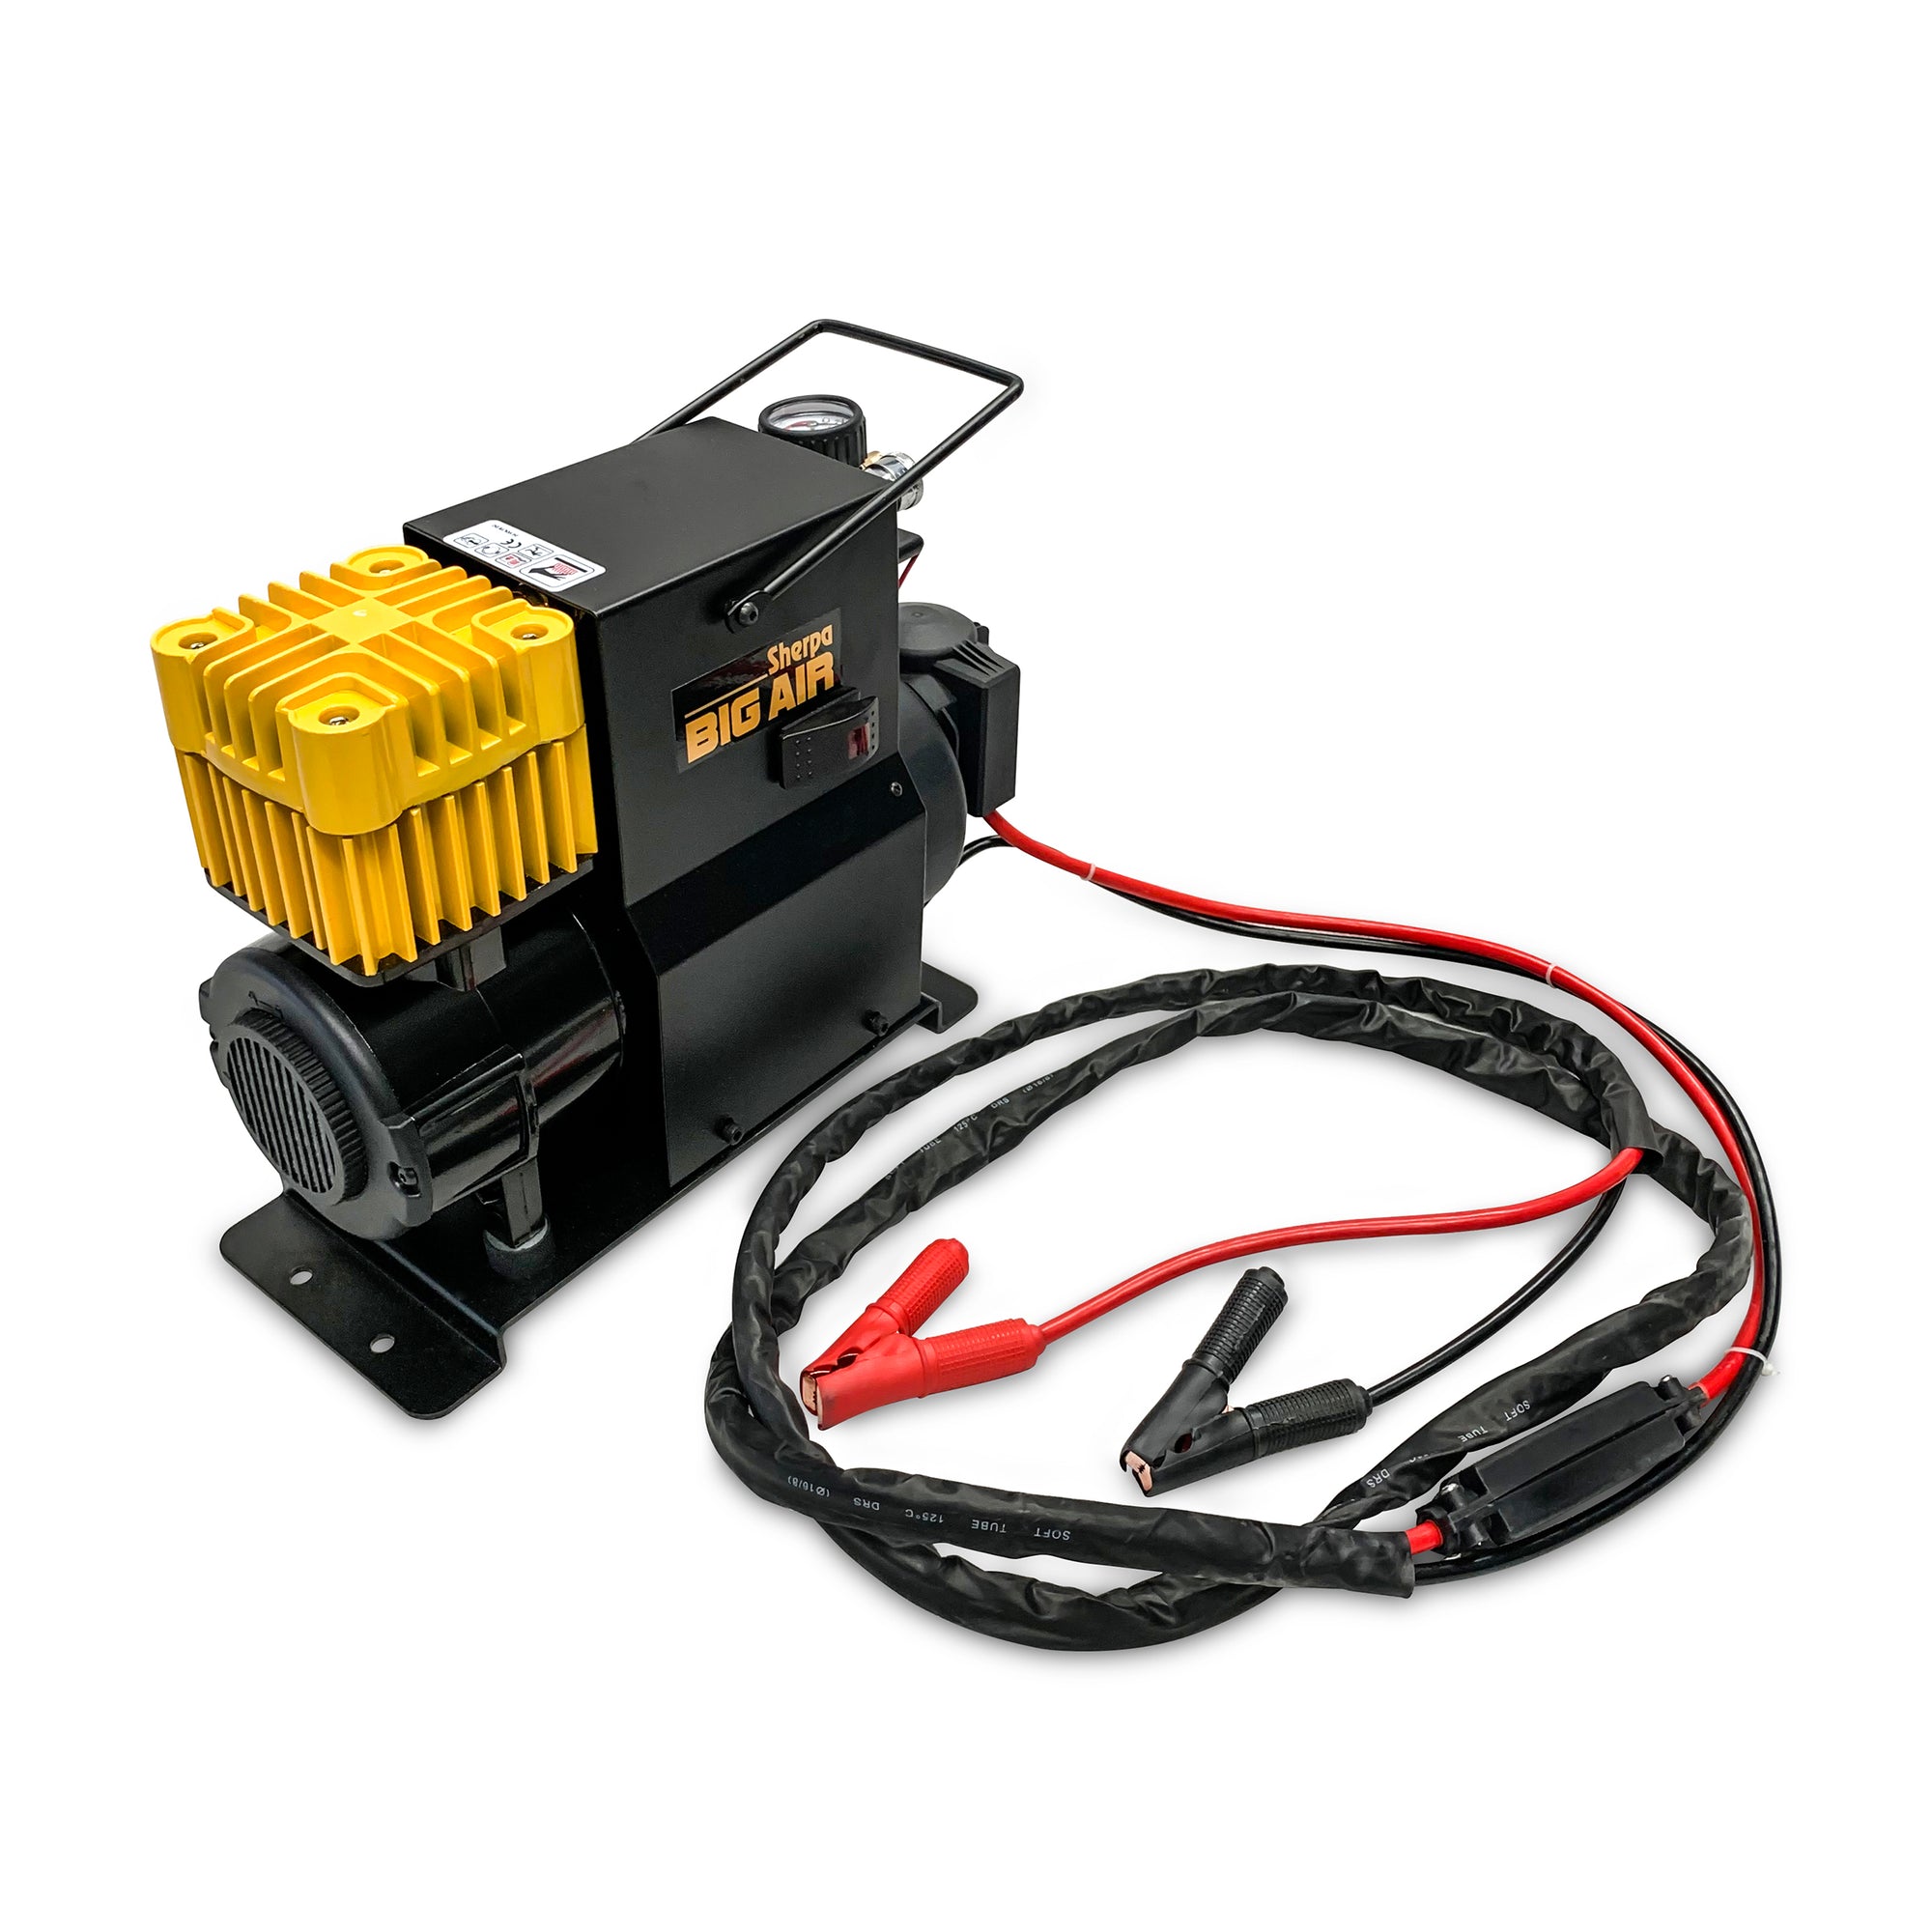 Heavy Duty Continuous Duty 12v air compressor 4WD